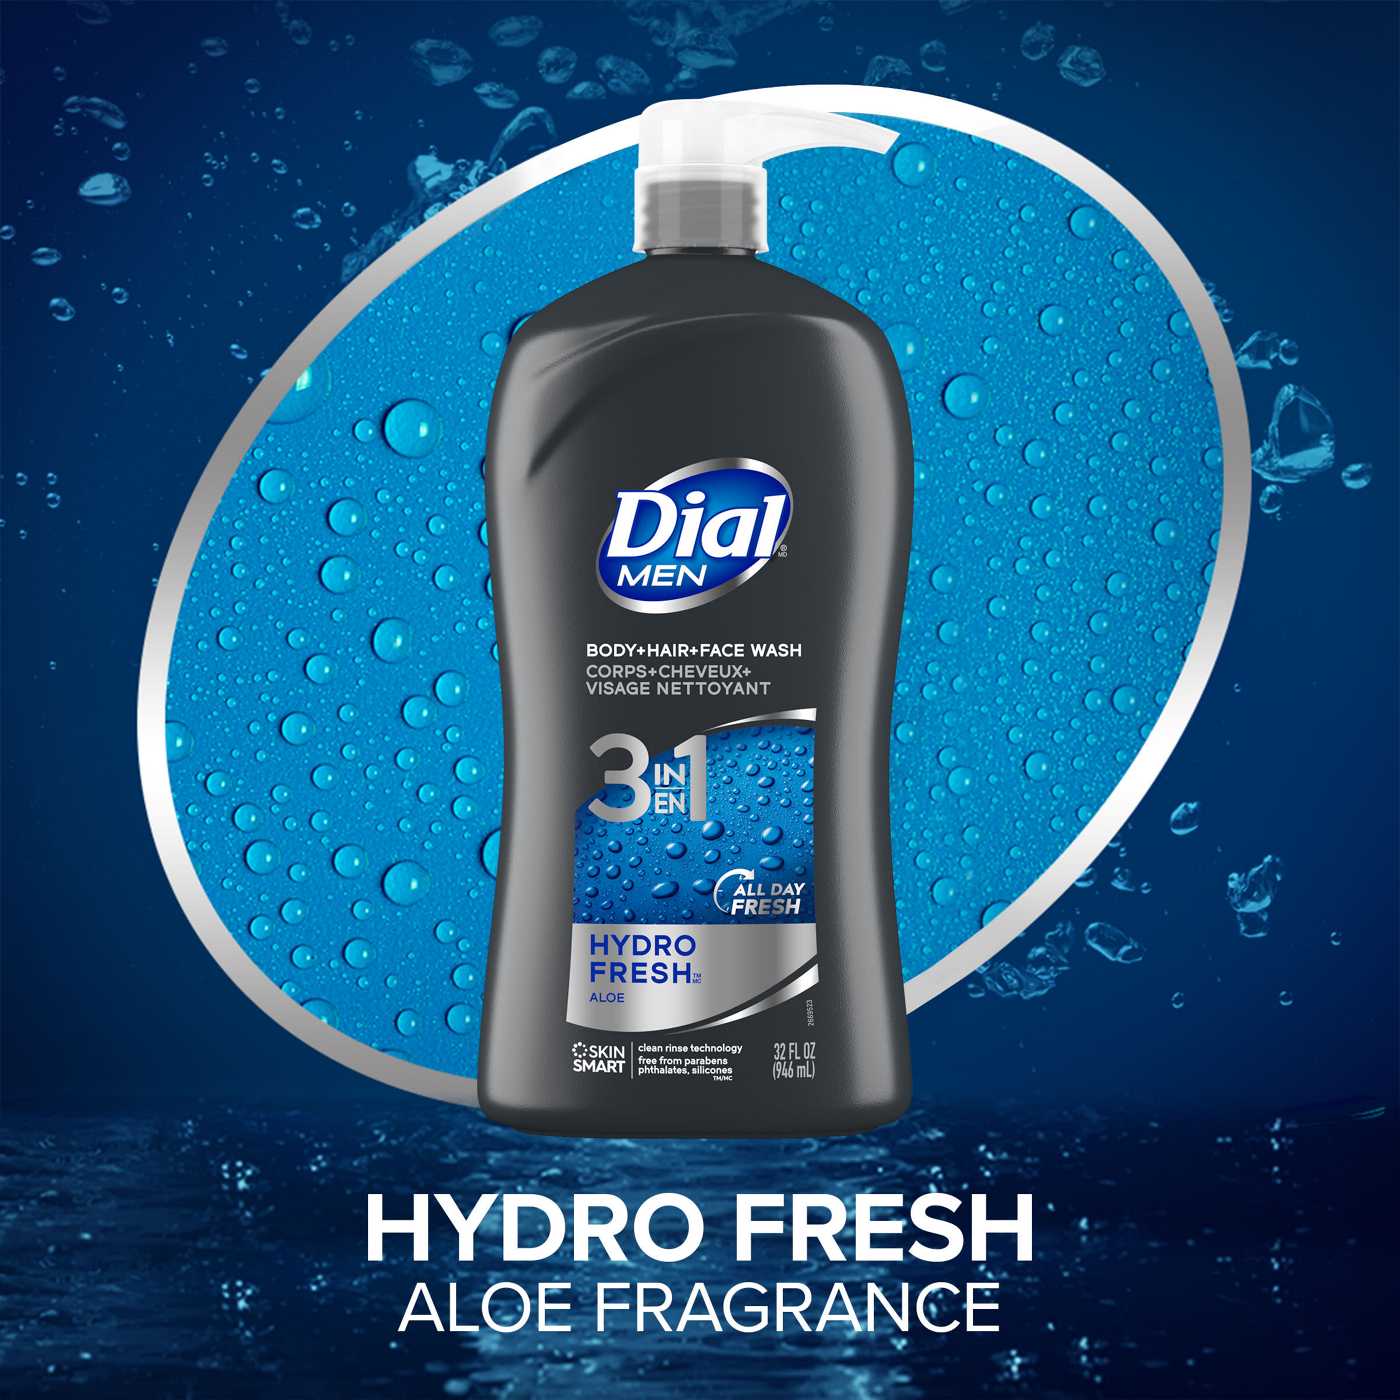 Dial Men 3in1 Body, Hair and Face Wash - Hydro Fresh; image 3 of 3